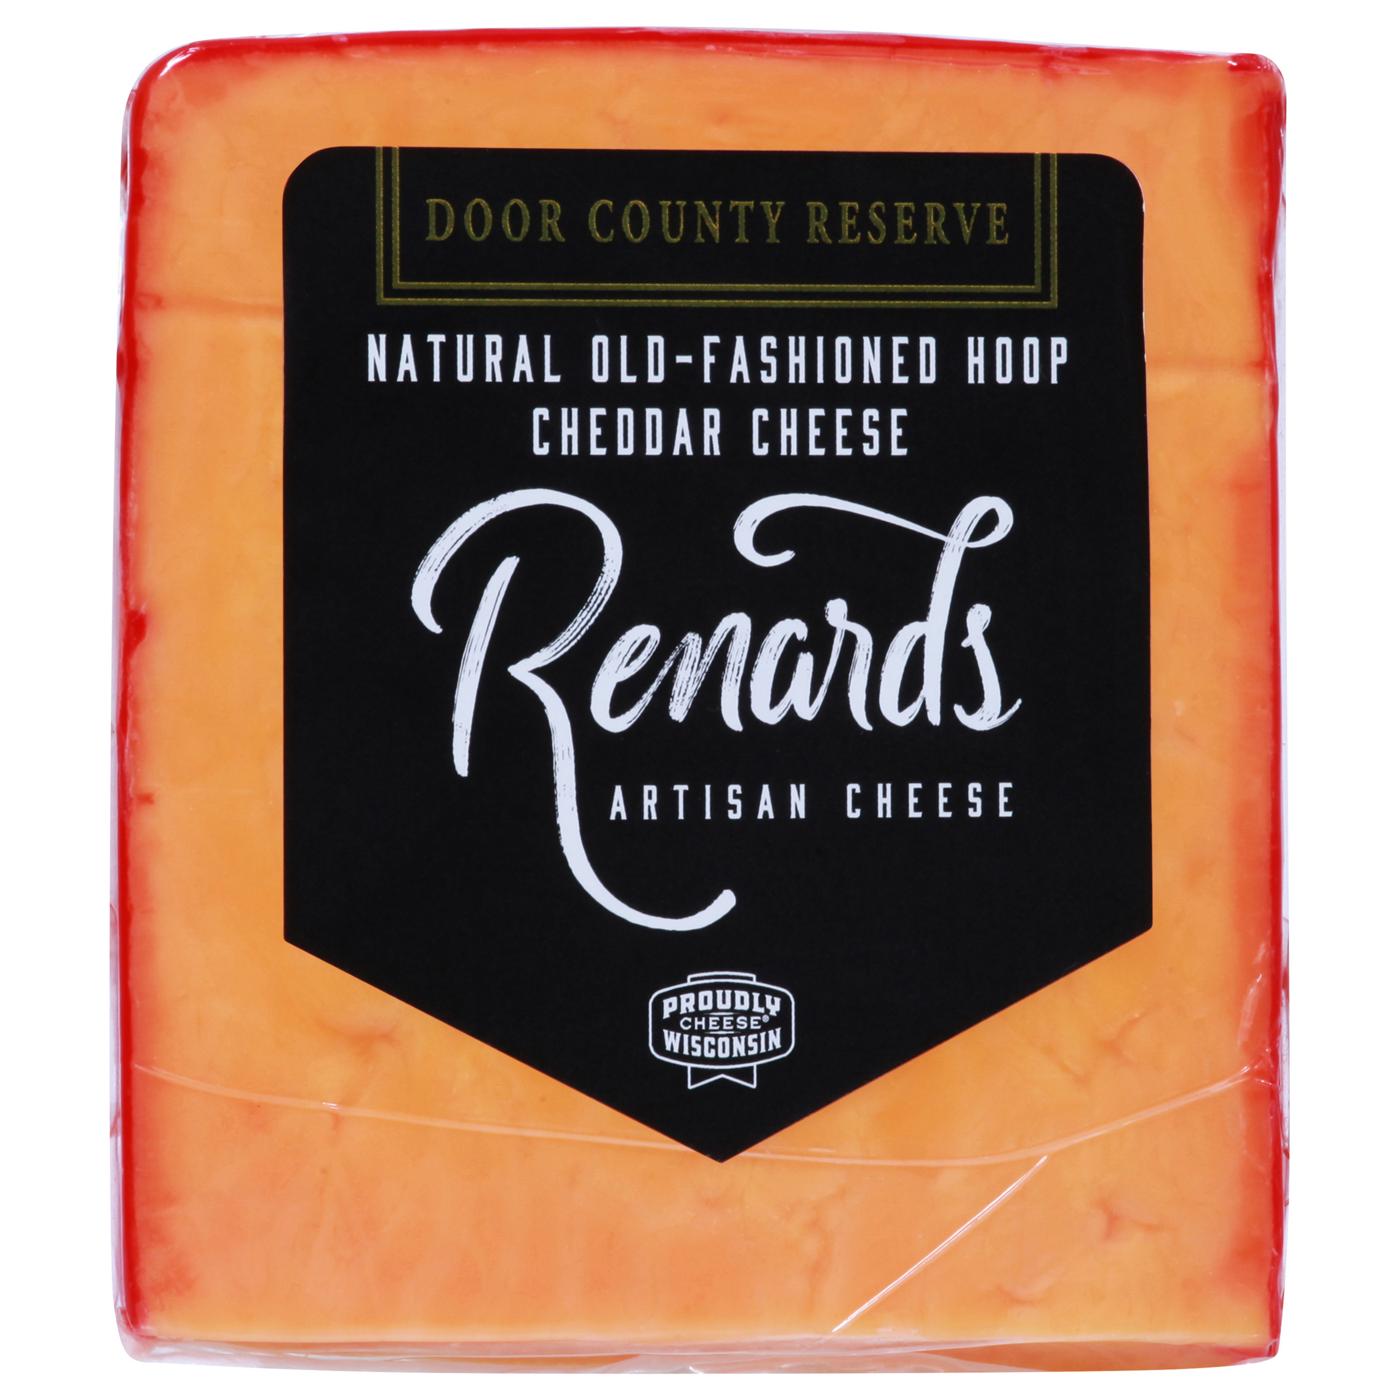 Renard's Artisan Cheese Natural Old-Fashioned Hoop Cheddar Cheese; image 1 of 3